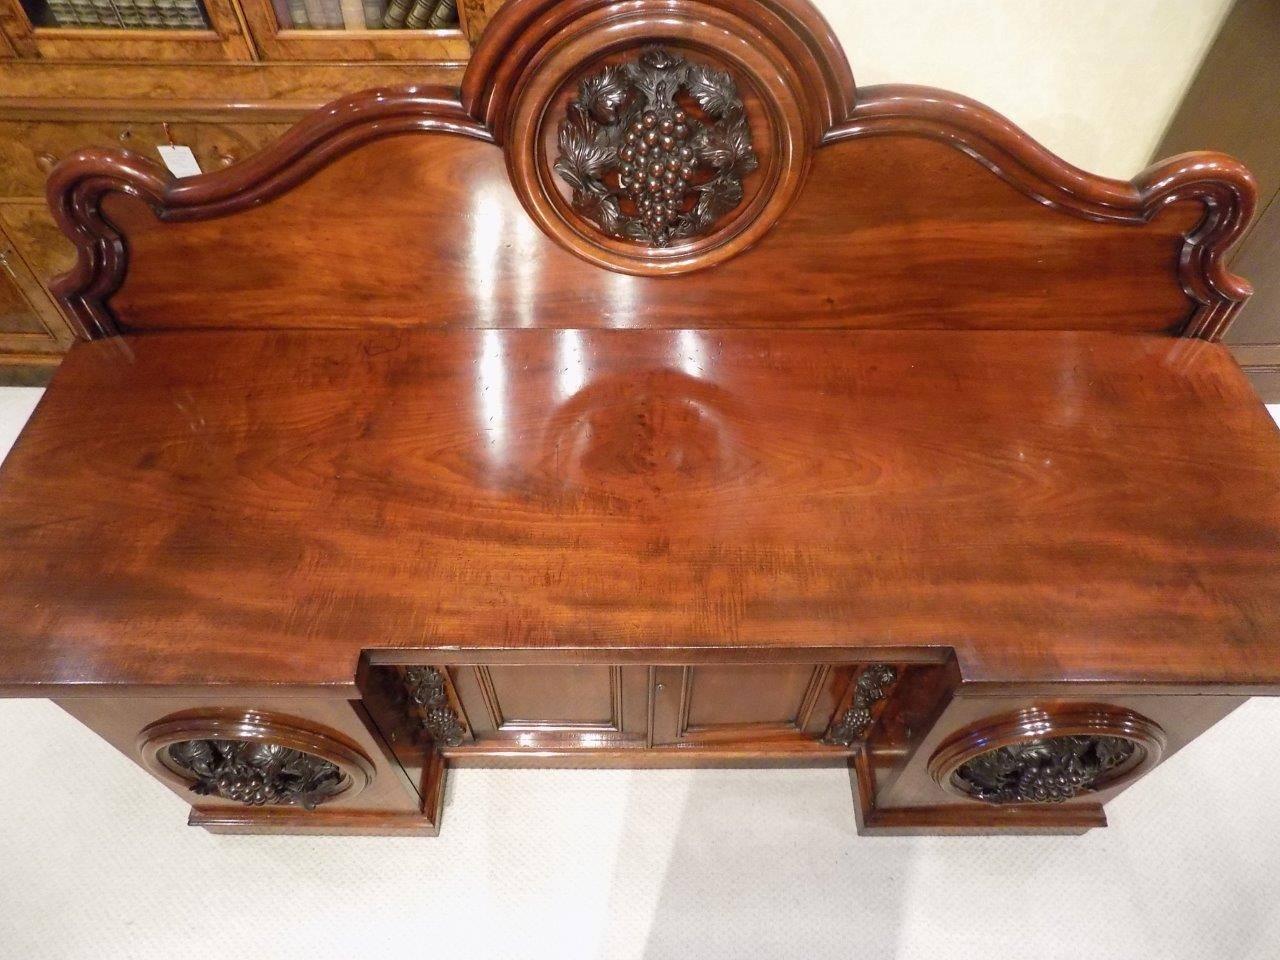 A superb quality figured mahogany Victorian period four-door antique sideboard. Having a raised arched back with a stunning carved central roundel depicting grape and vine leaves which is repeated on the doors of the base. The rectangular top of